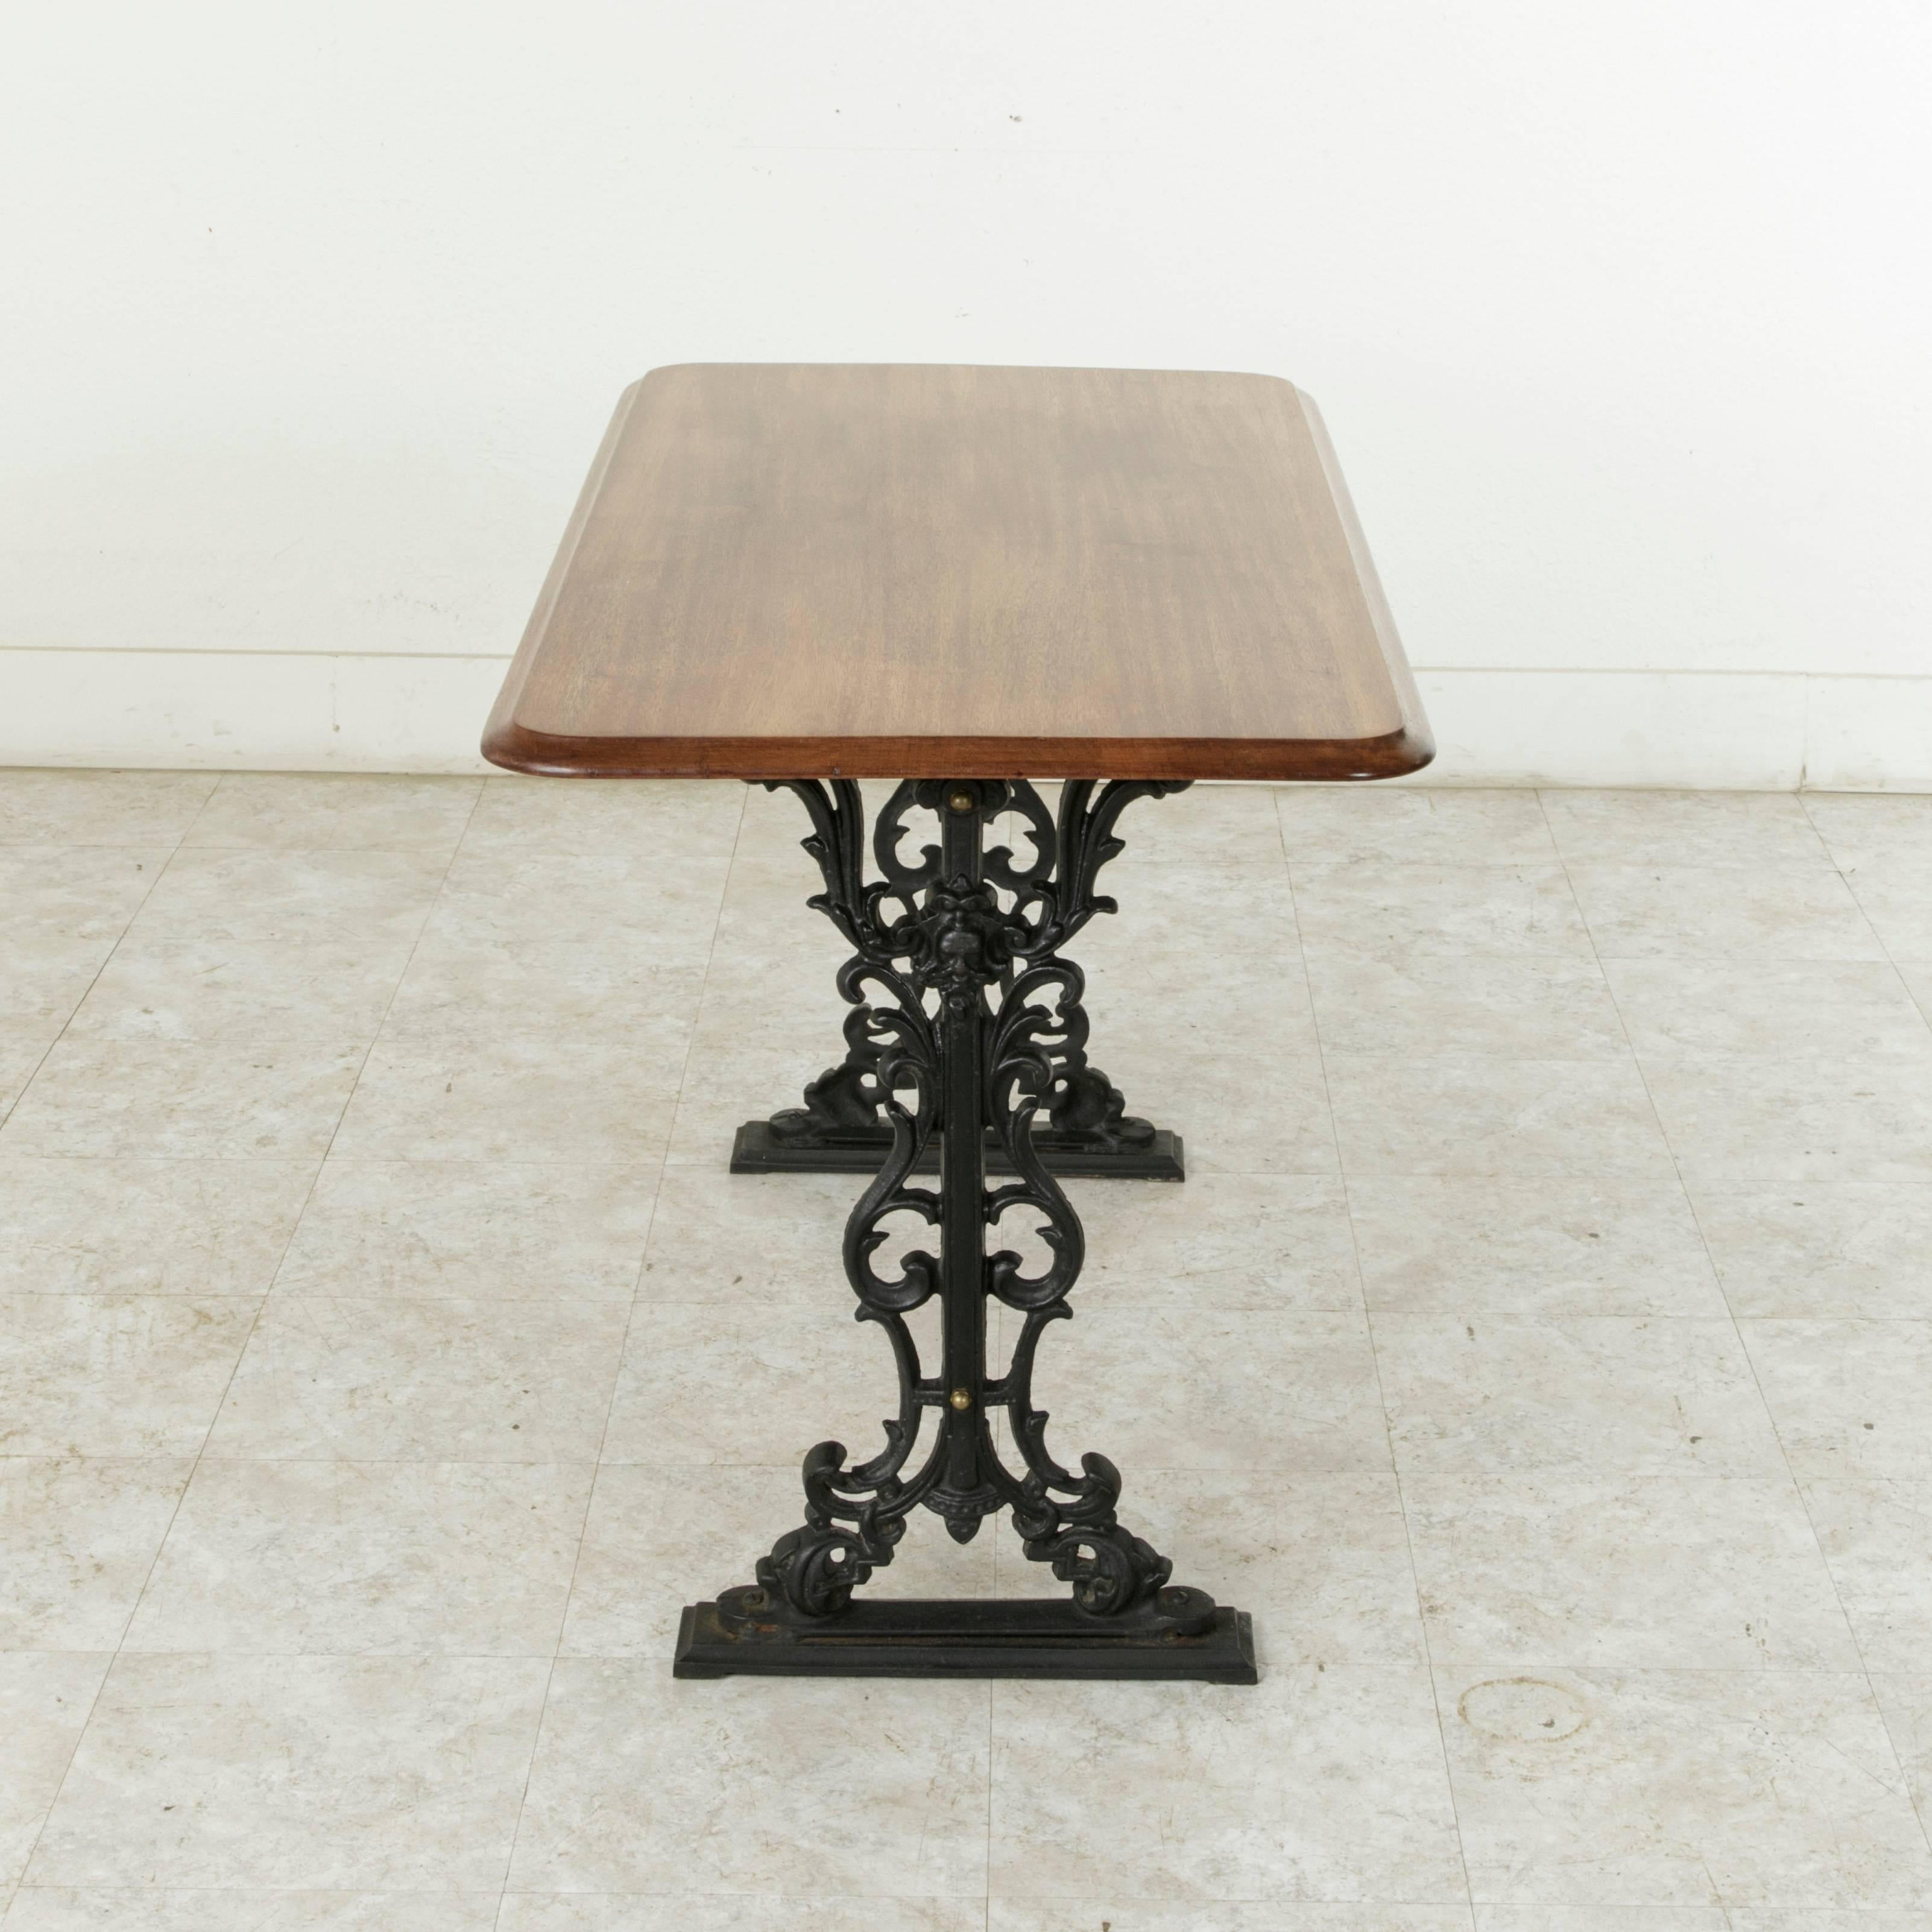 This turn of the 20th century French Paris bistro table features a cast iron base of intricate scrolling and its original solid mahogany top. The base measures 40 inches in length and 16 inches in width and has a vertical X-stretcher that provides